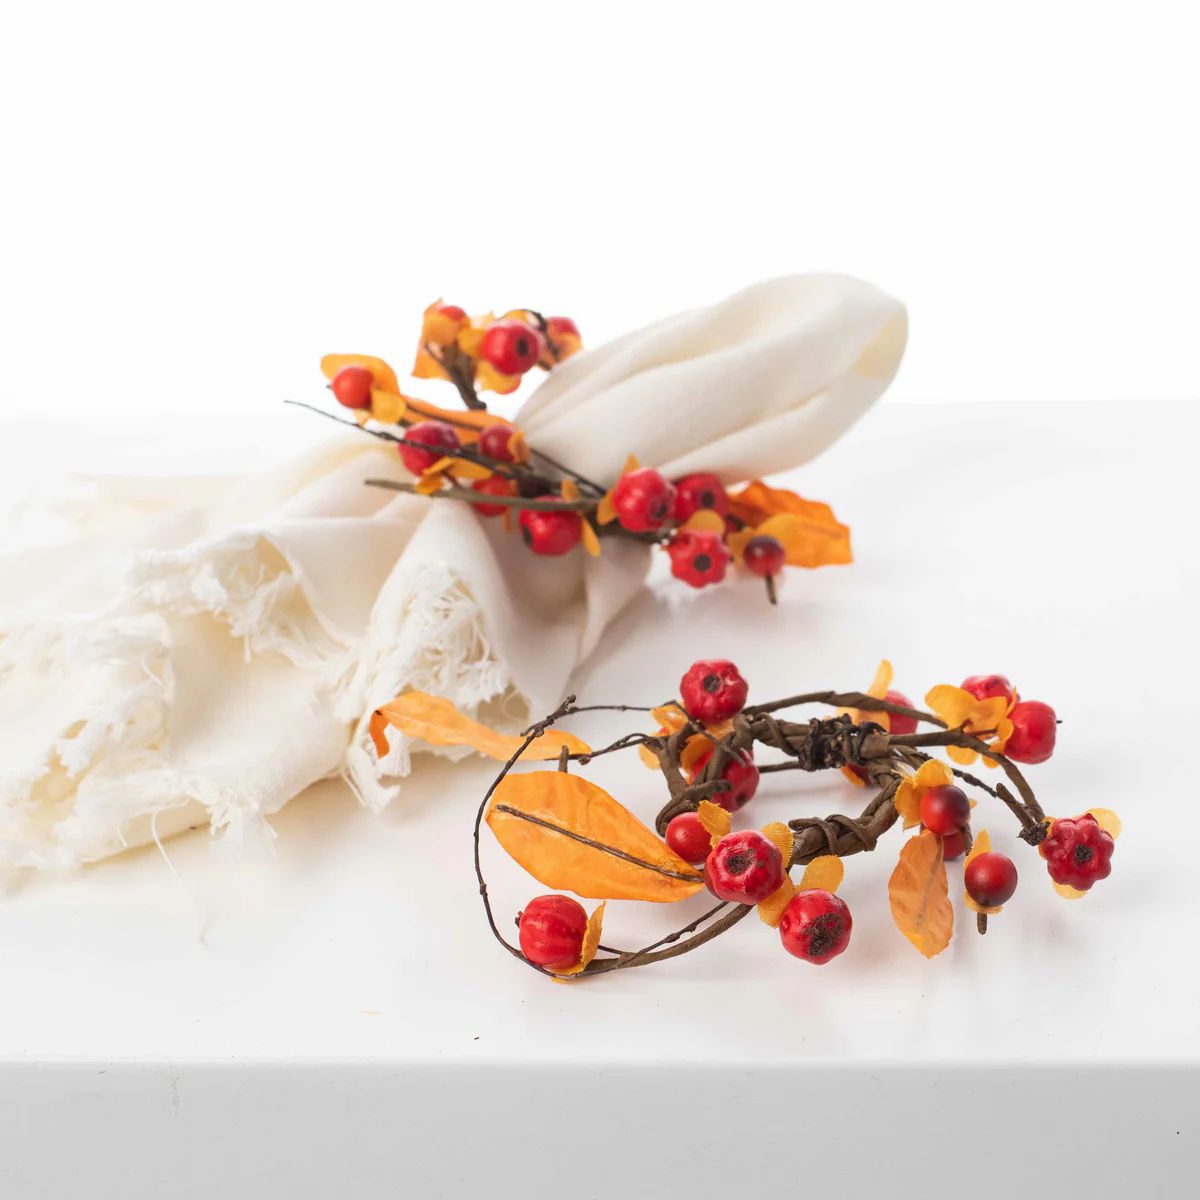 Bittersweet Autumn Leaf & Berry Fall Accent Candle & Napkin Ring Set | Darby Creek Trading